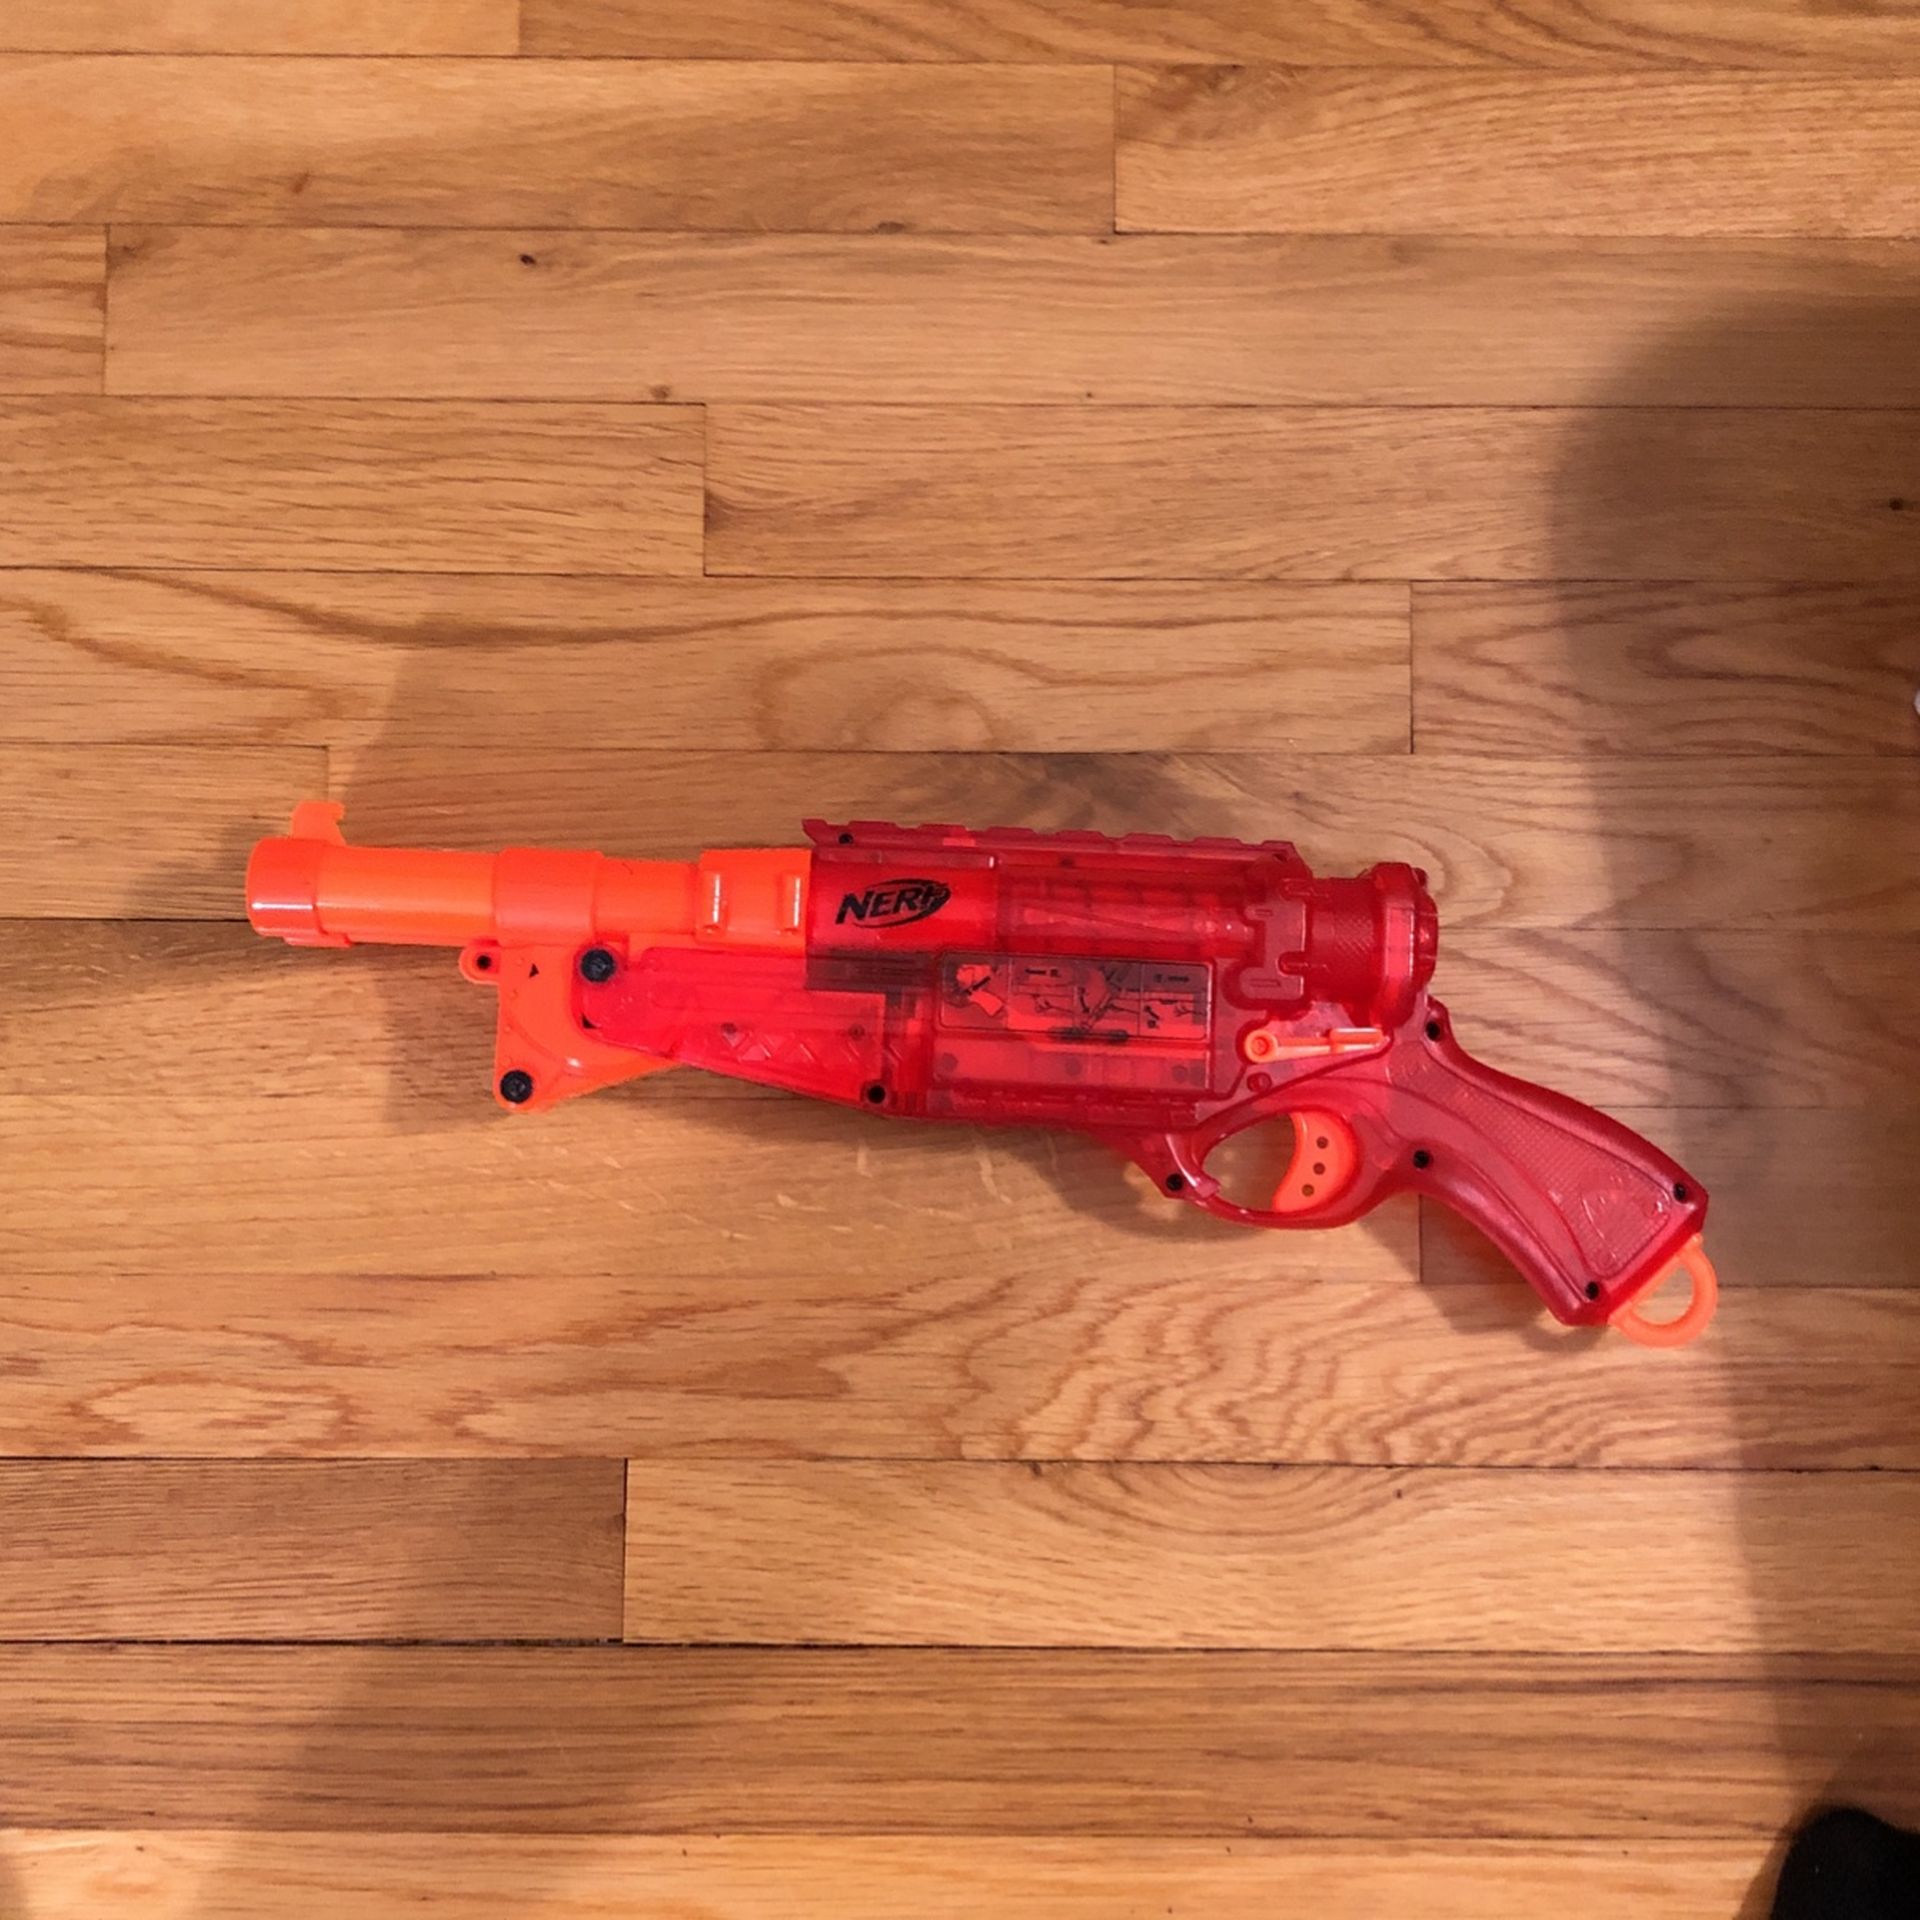 Nerf Double Shotgun Sale in Falls, NY - OfferUp